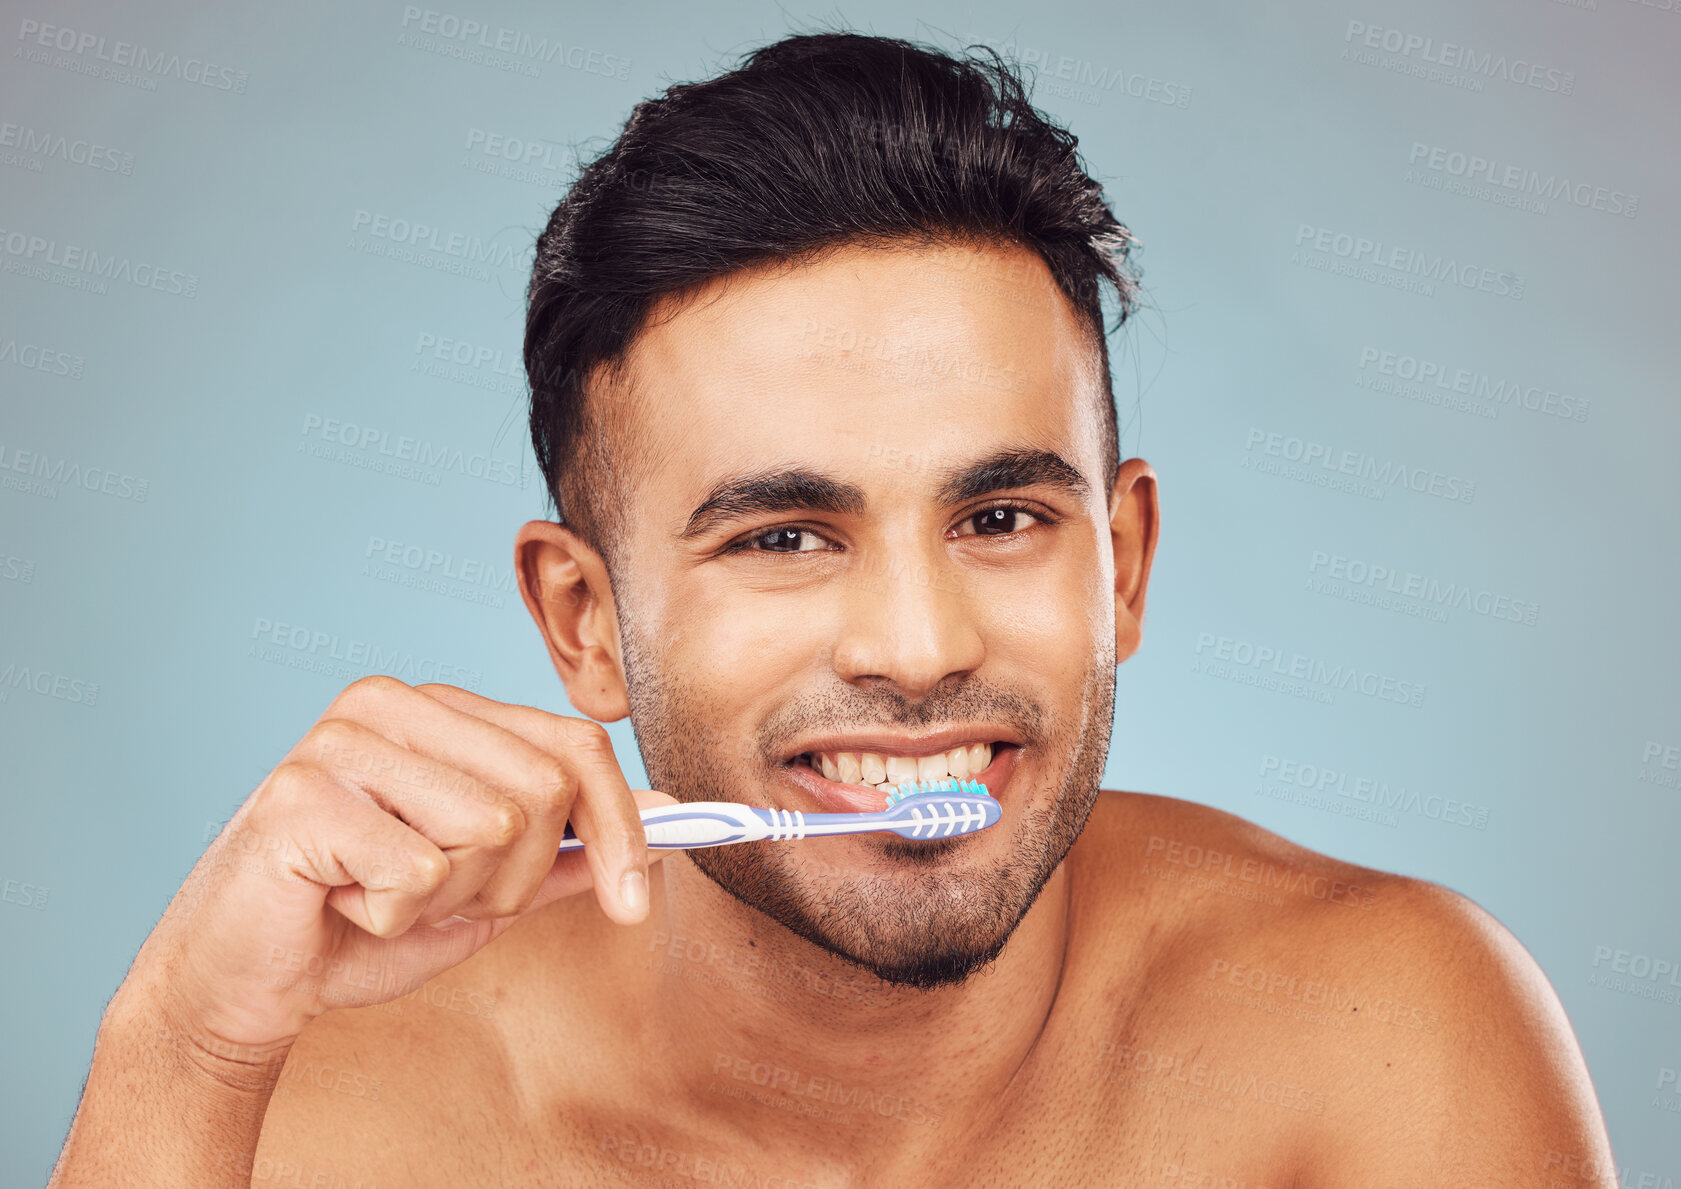 Buy stock photo Portrait of one smiling young indian man brushing his teeth against a blue studio background. Handsome guy grooming and cleaning his mouth for better oral and dental hygiene. Brush twice daily to prevent tooth decay and gum disease